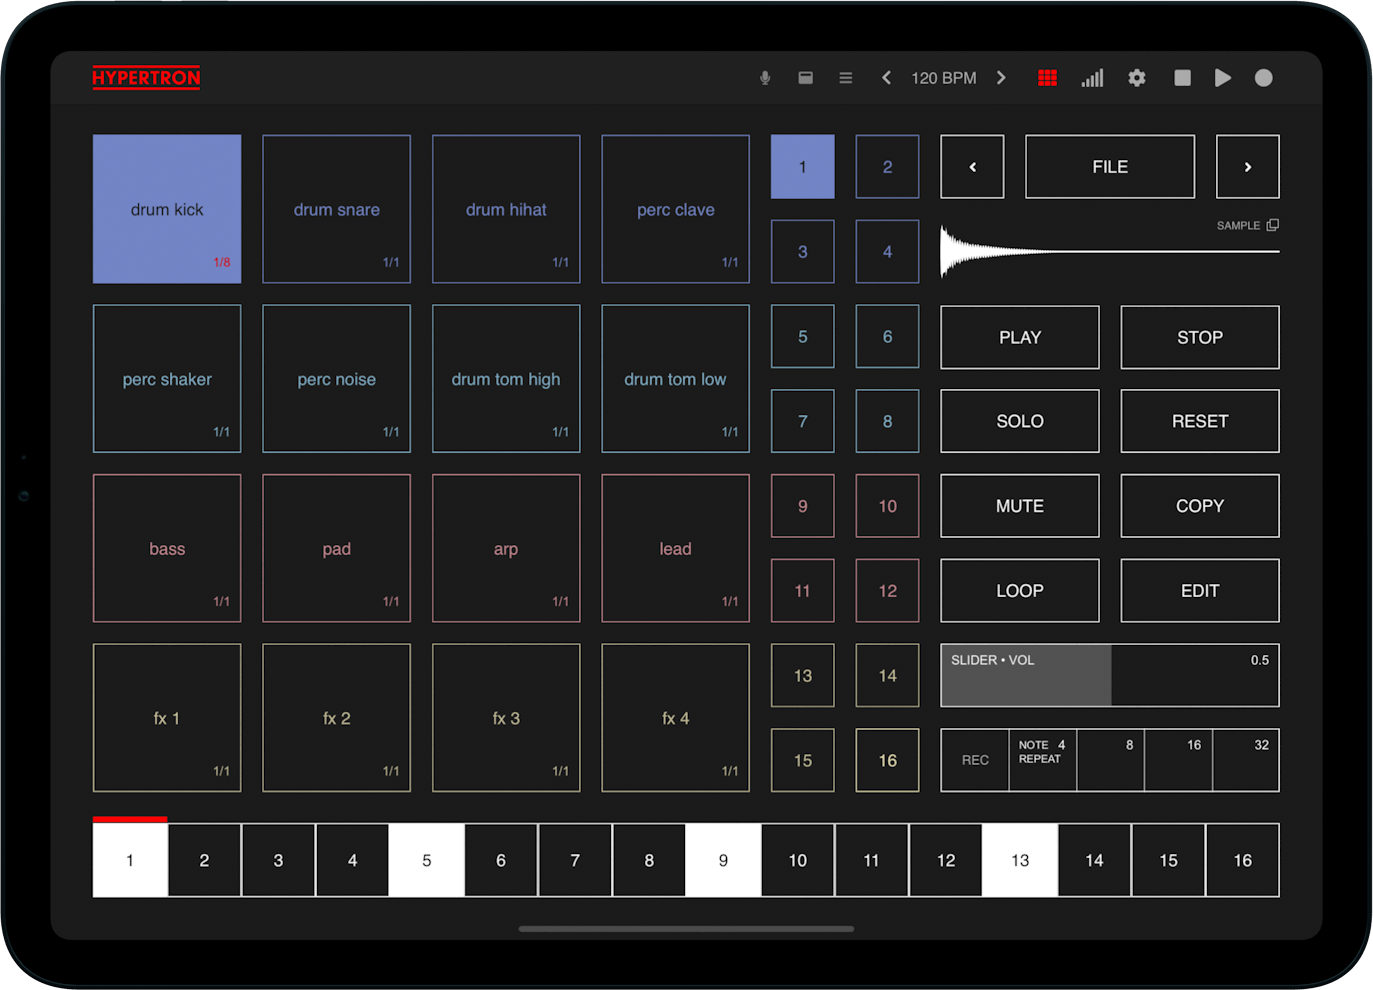 Hypertron sequencer sampler synthesizer on iPad